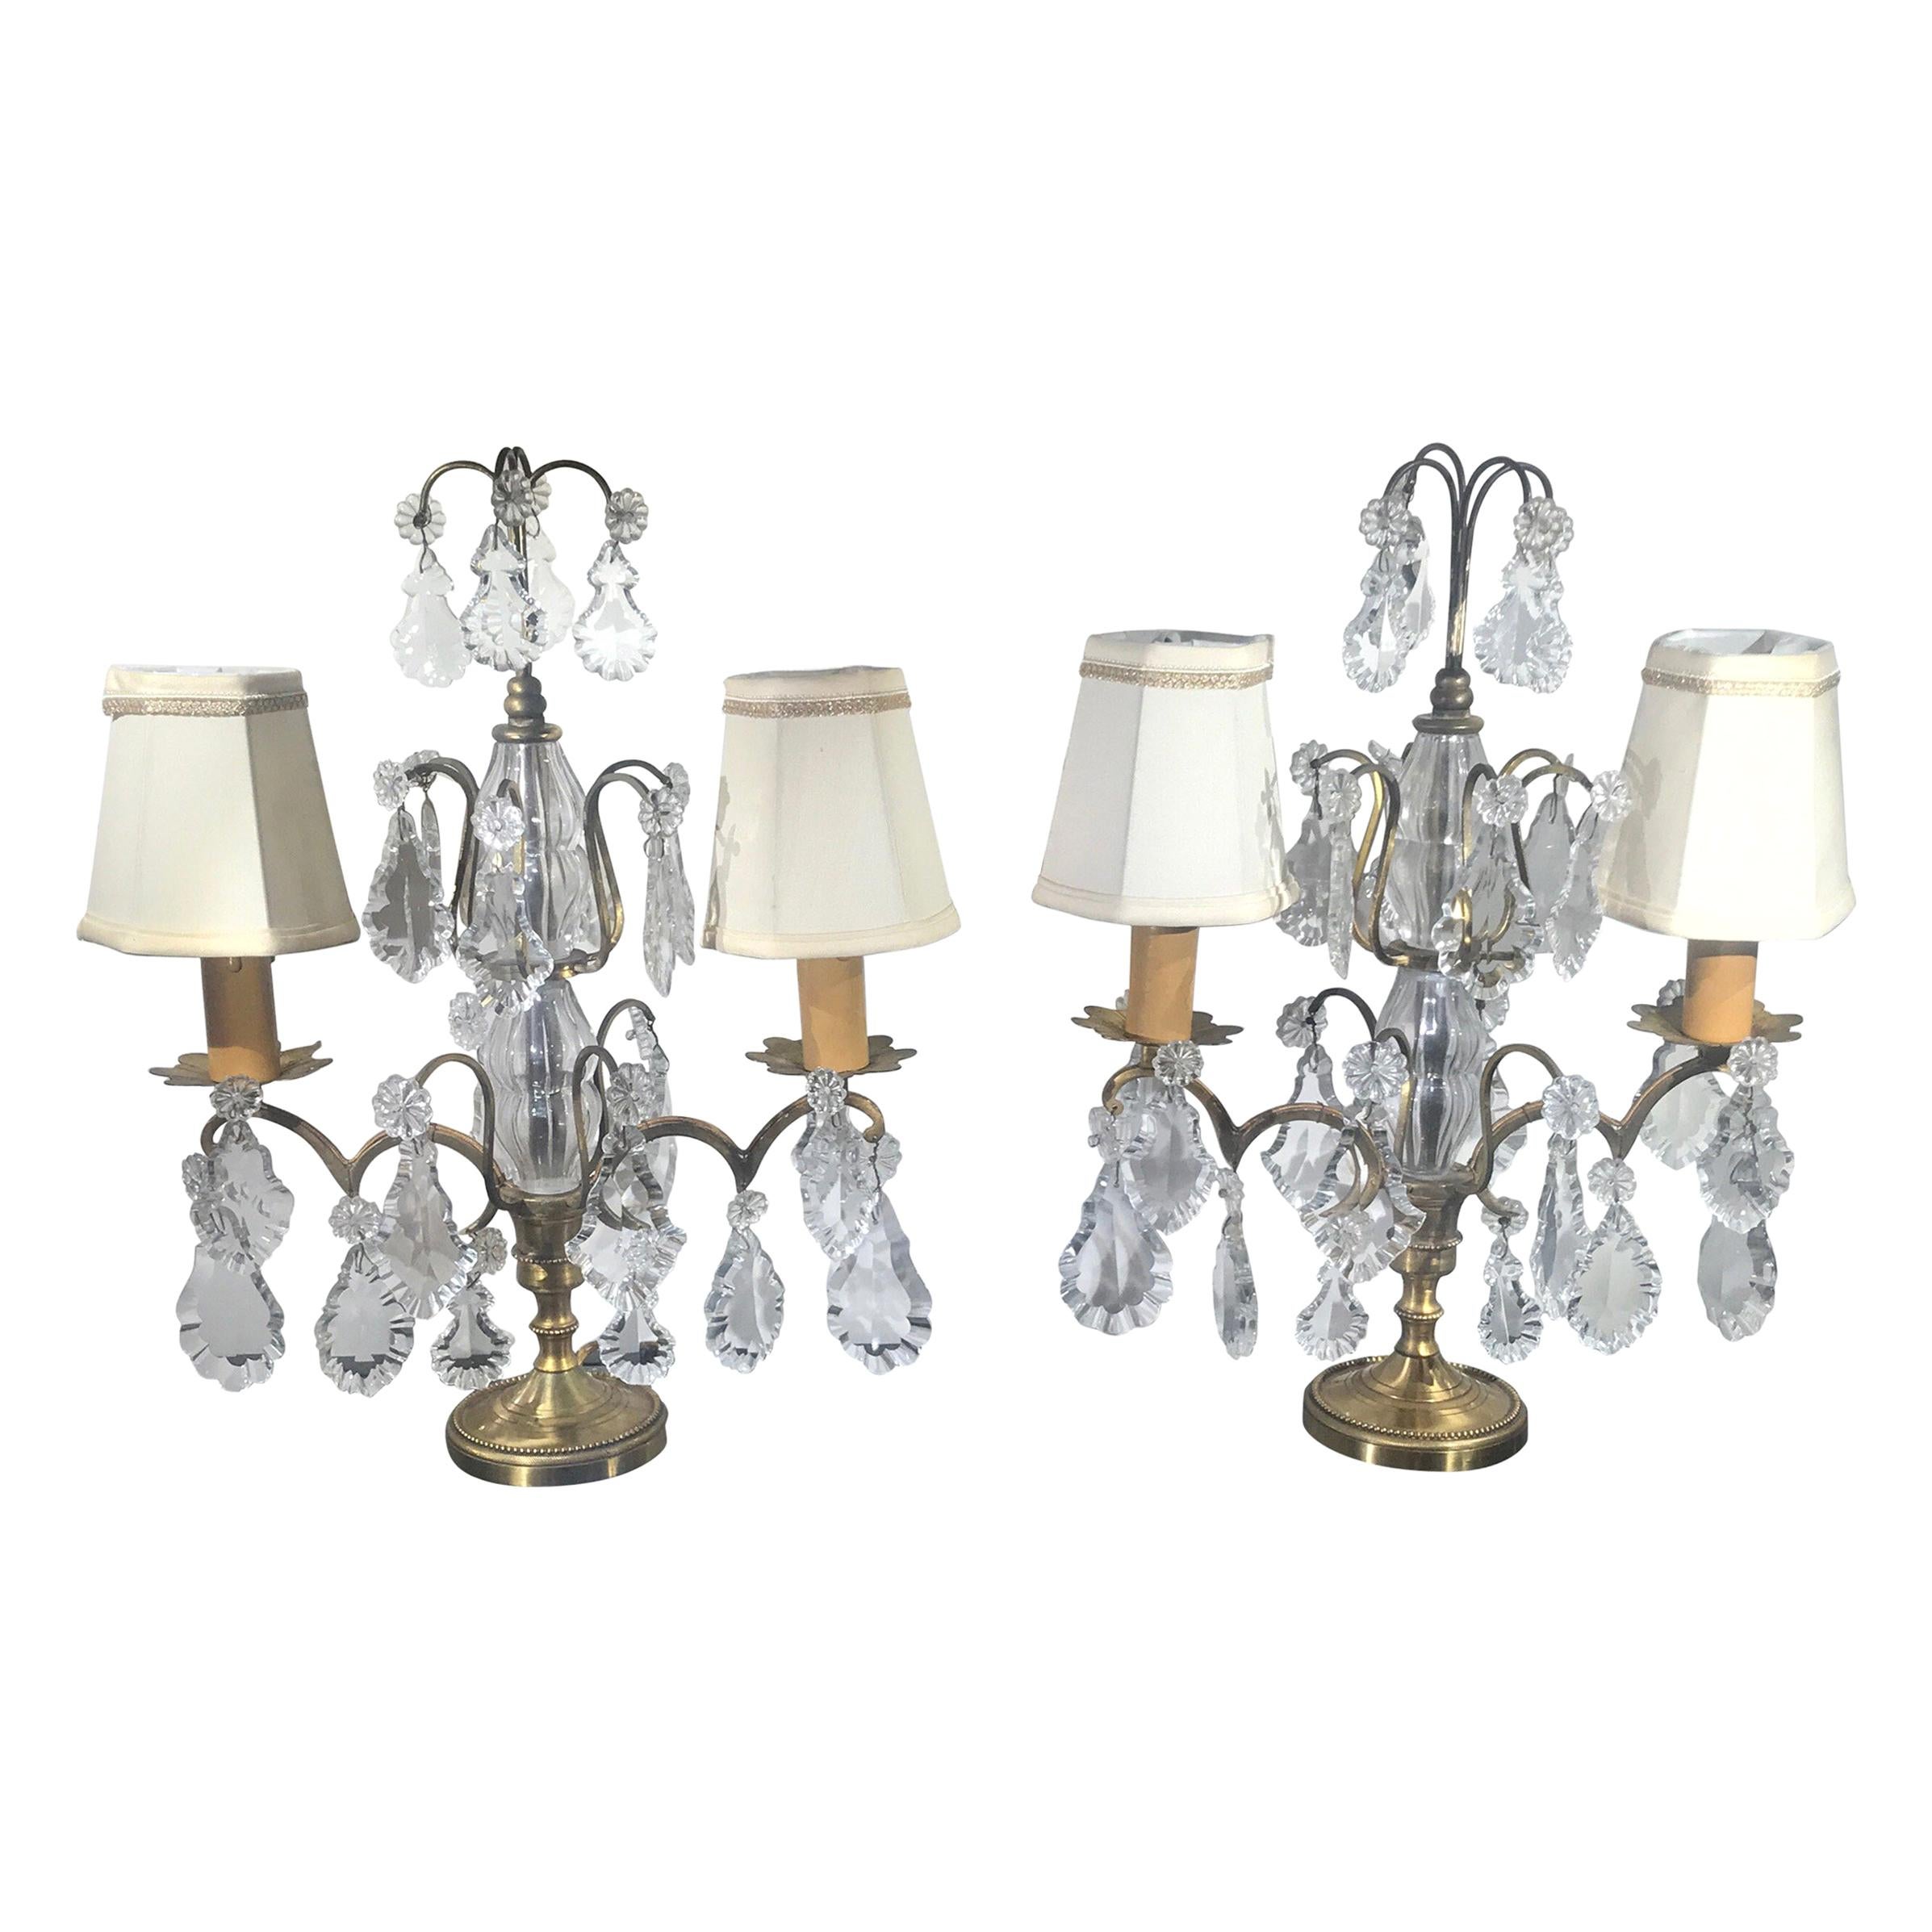 Pair of French Girondole Candelabra Lamps